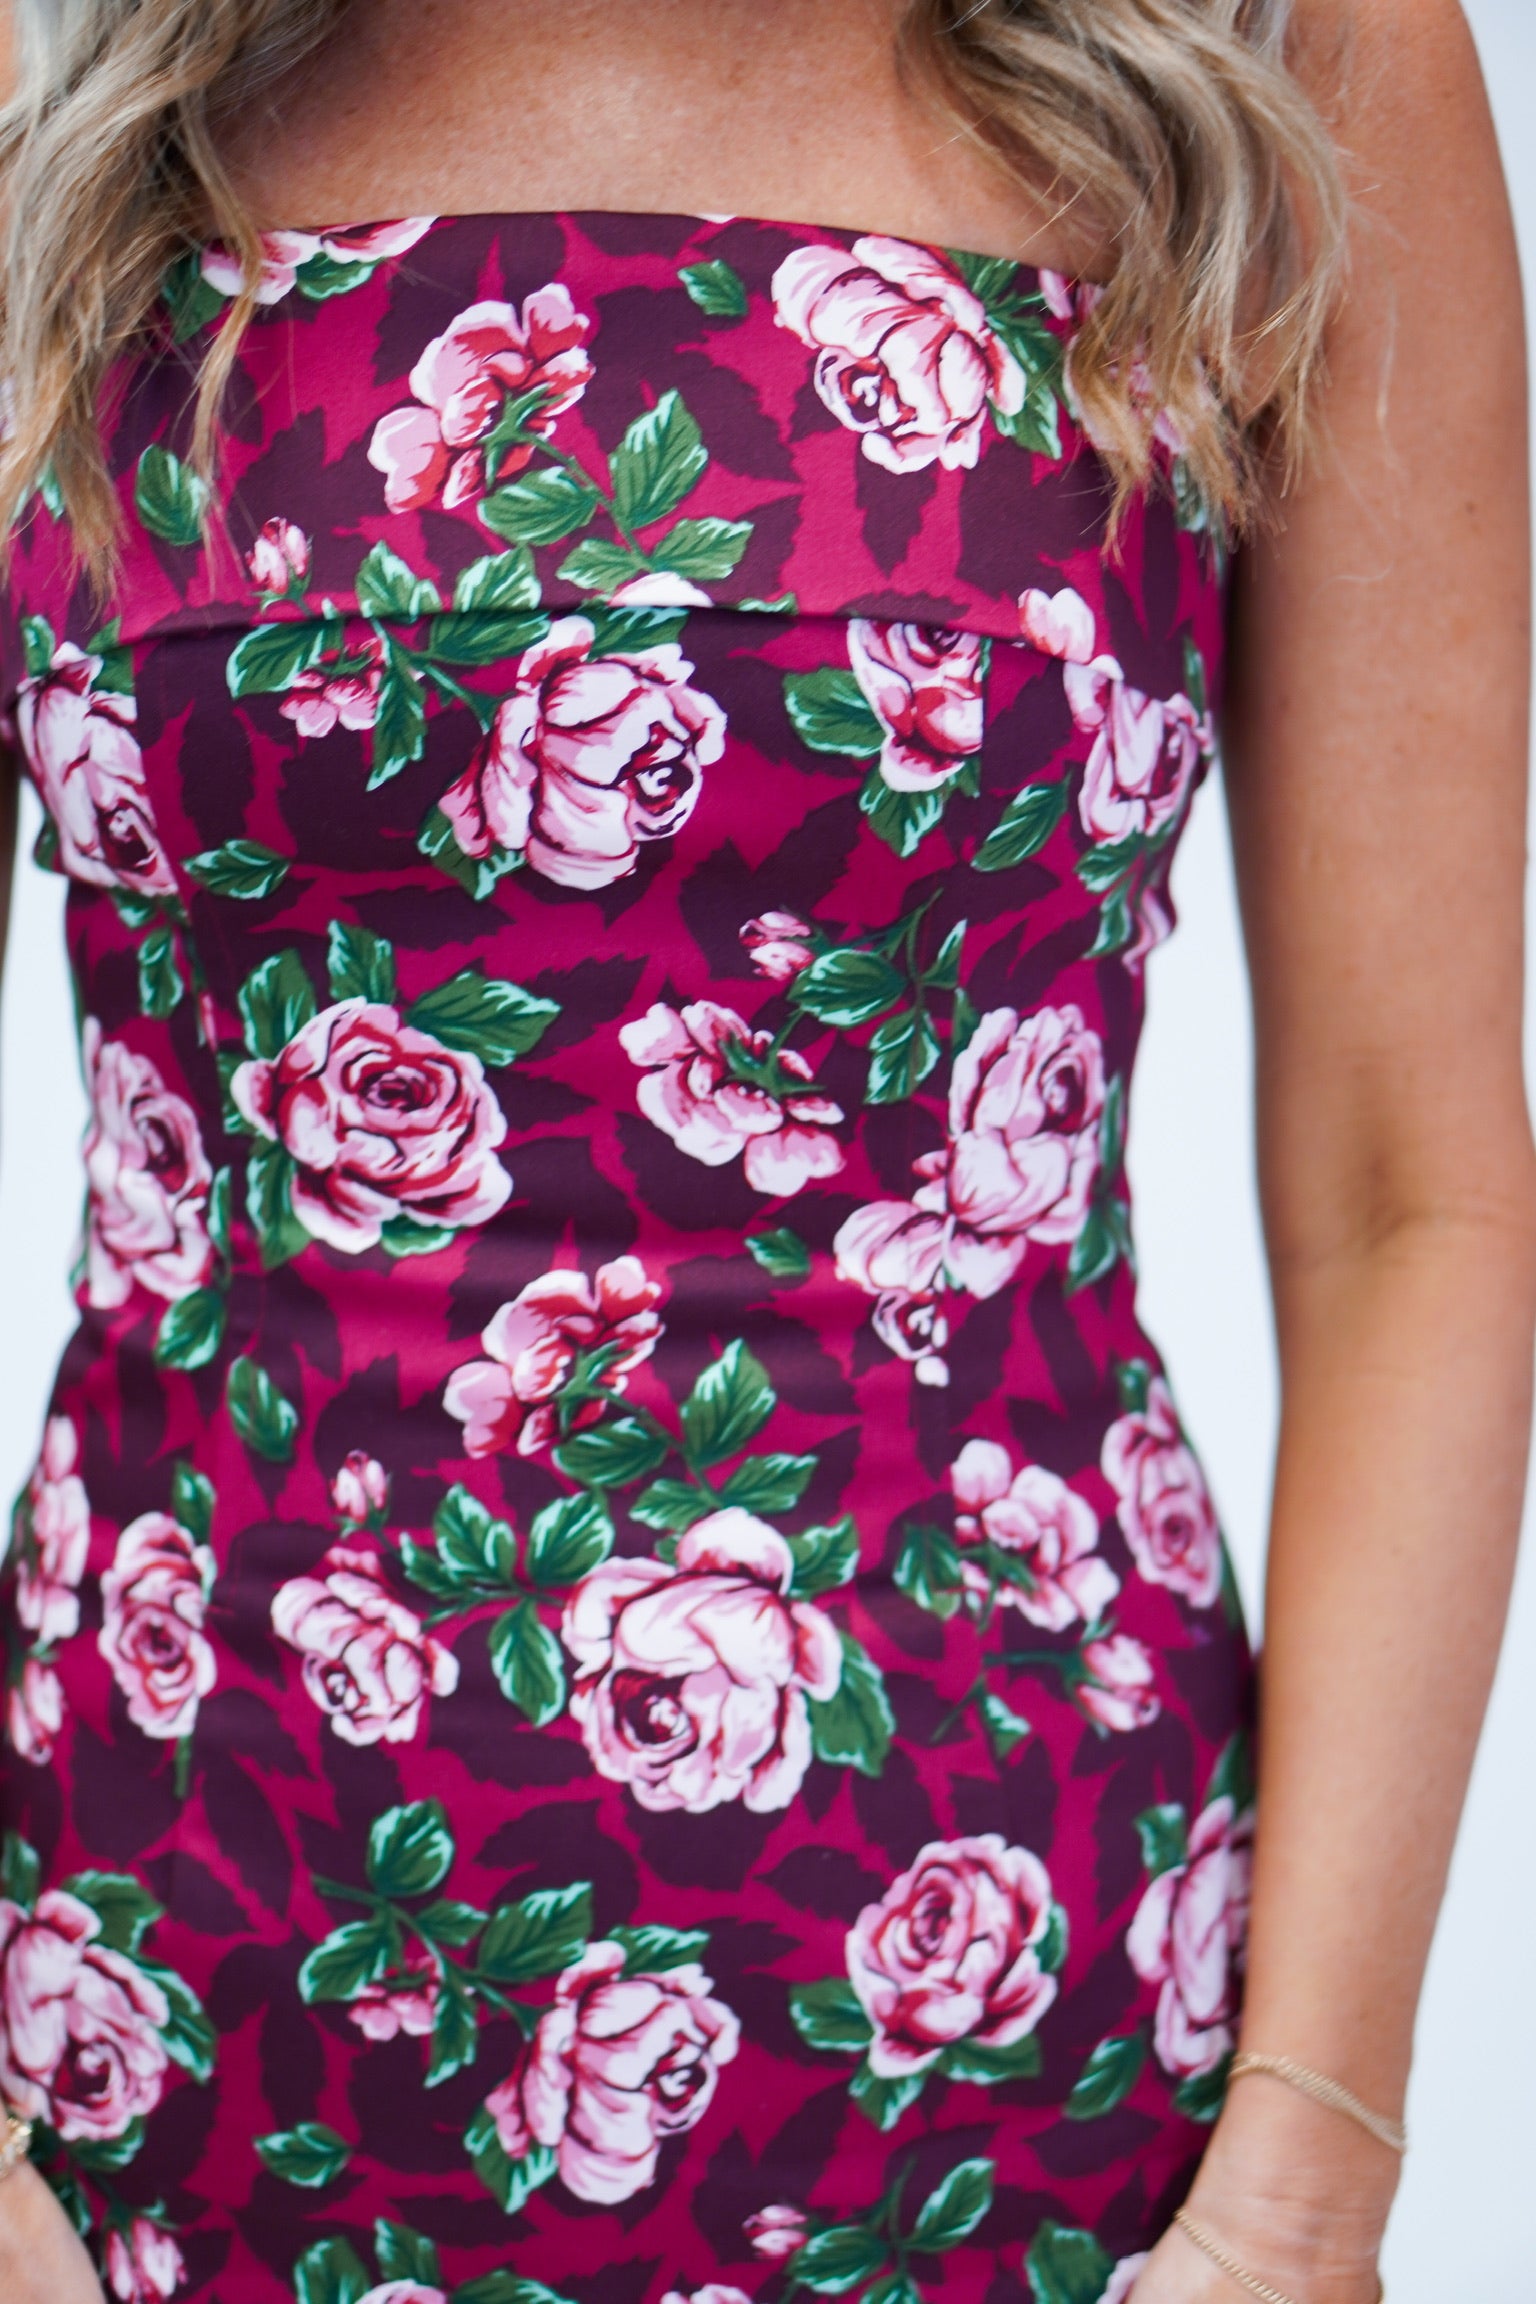 up close shot of details of the tube style dress with floral details. the dress is a dark magenta color